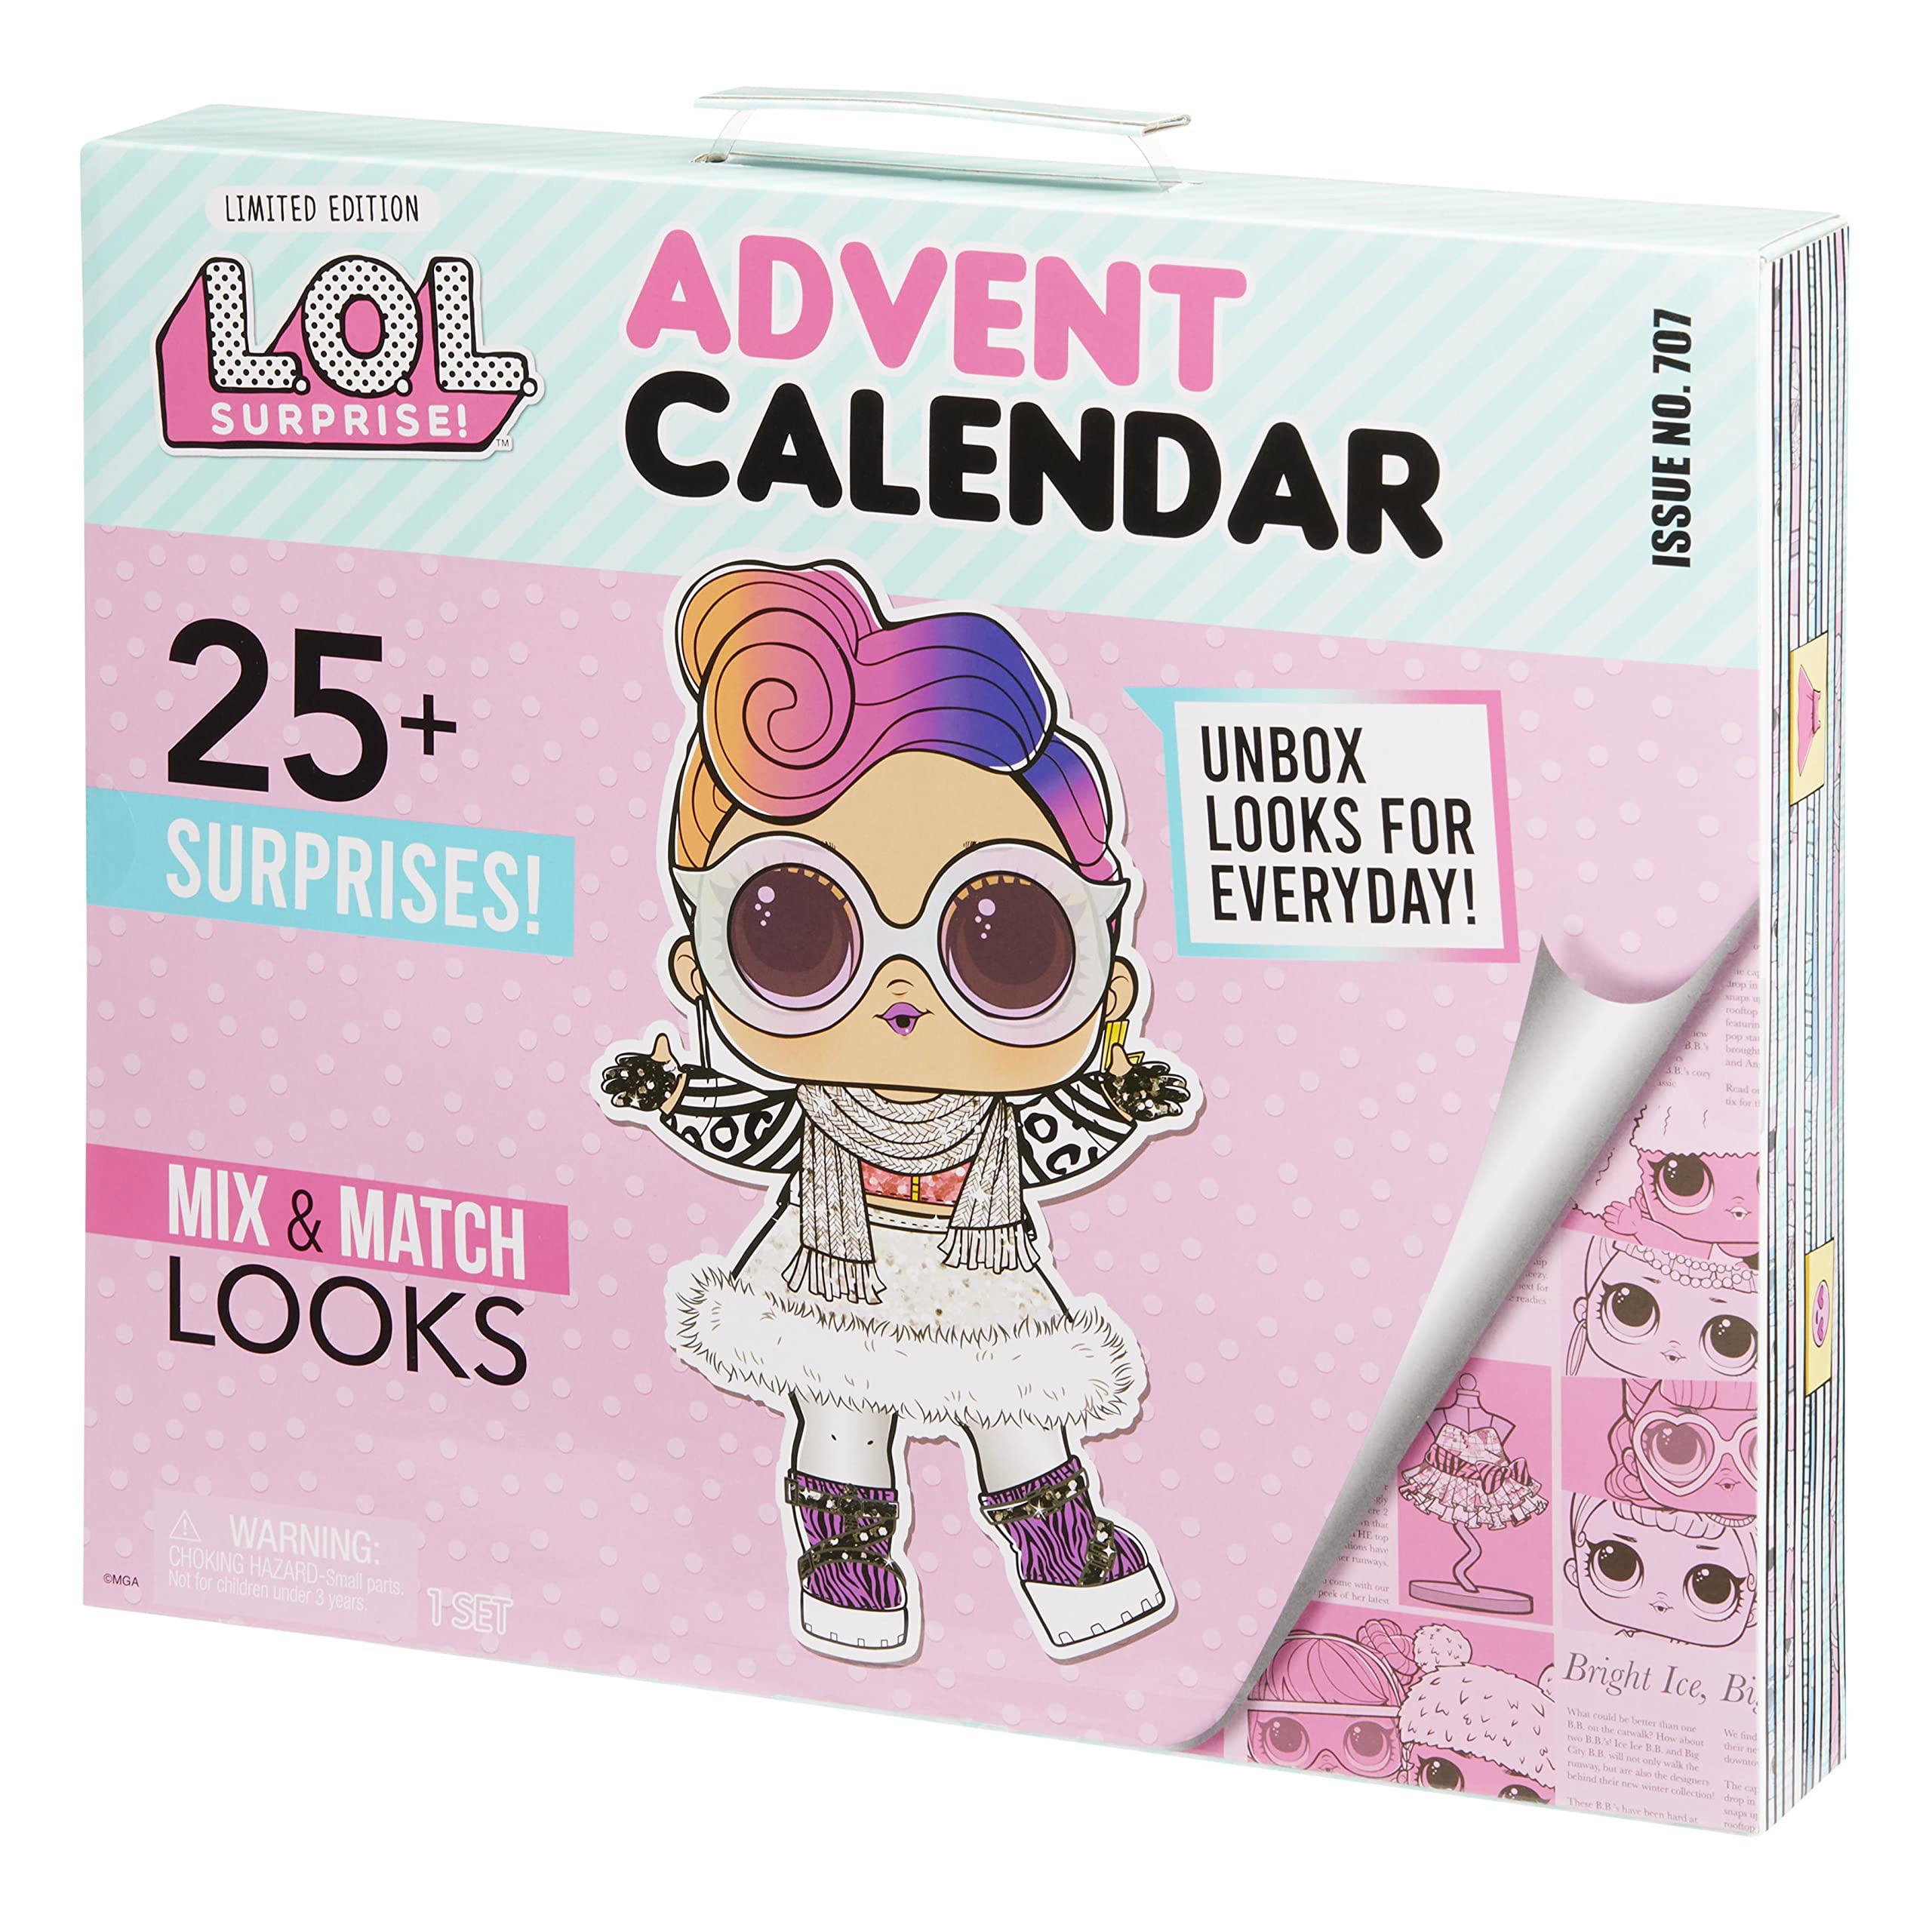 l.o.l. surprise! advent calendar with 25+ surprises including a collectible doll with mix and match outfits, shoes, and acces